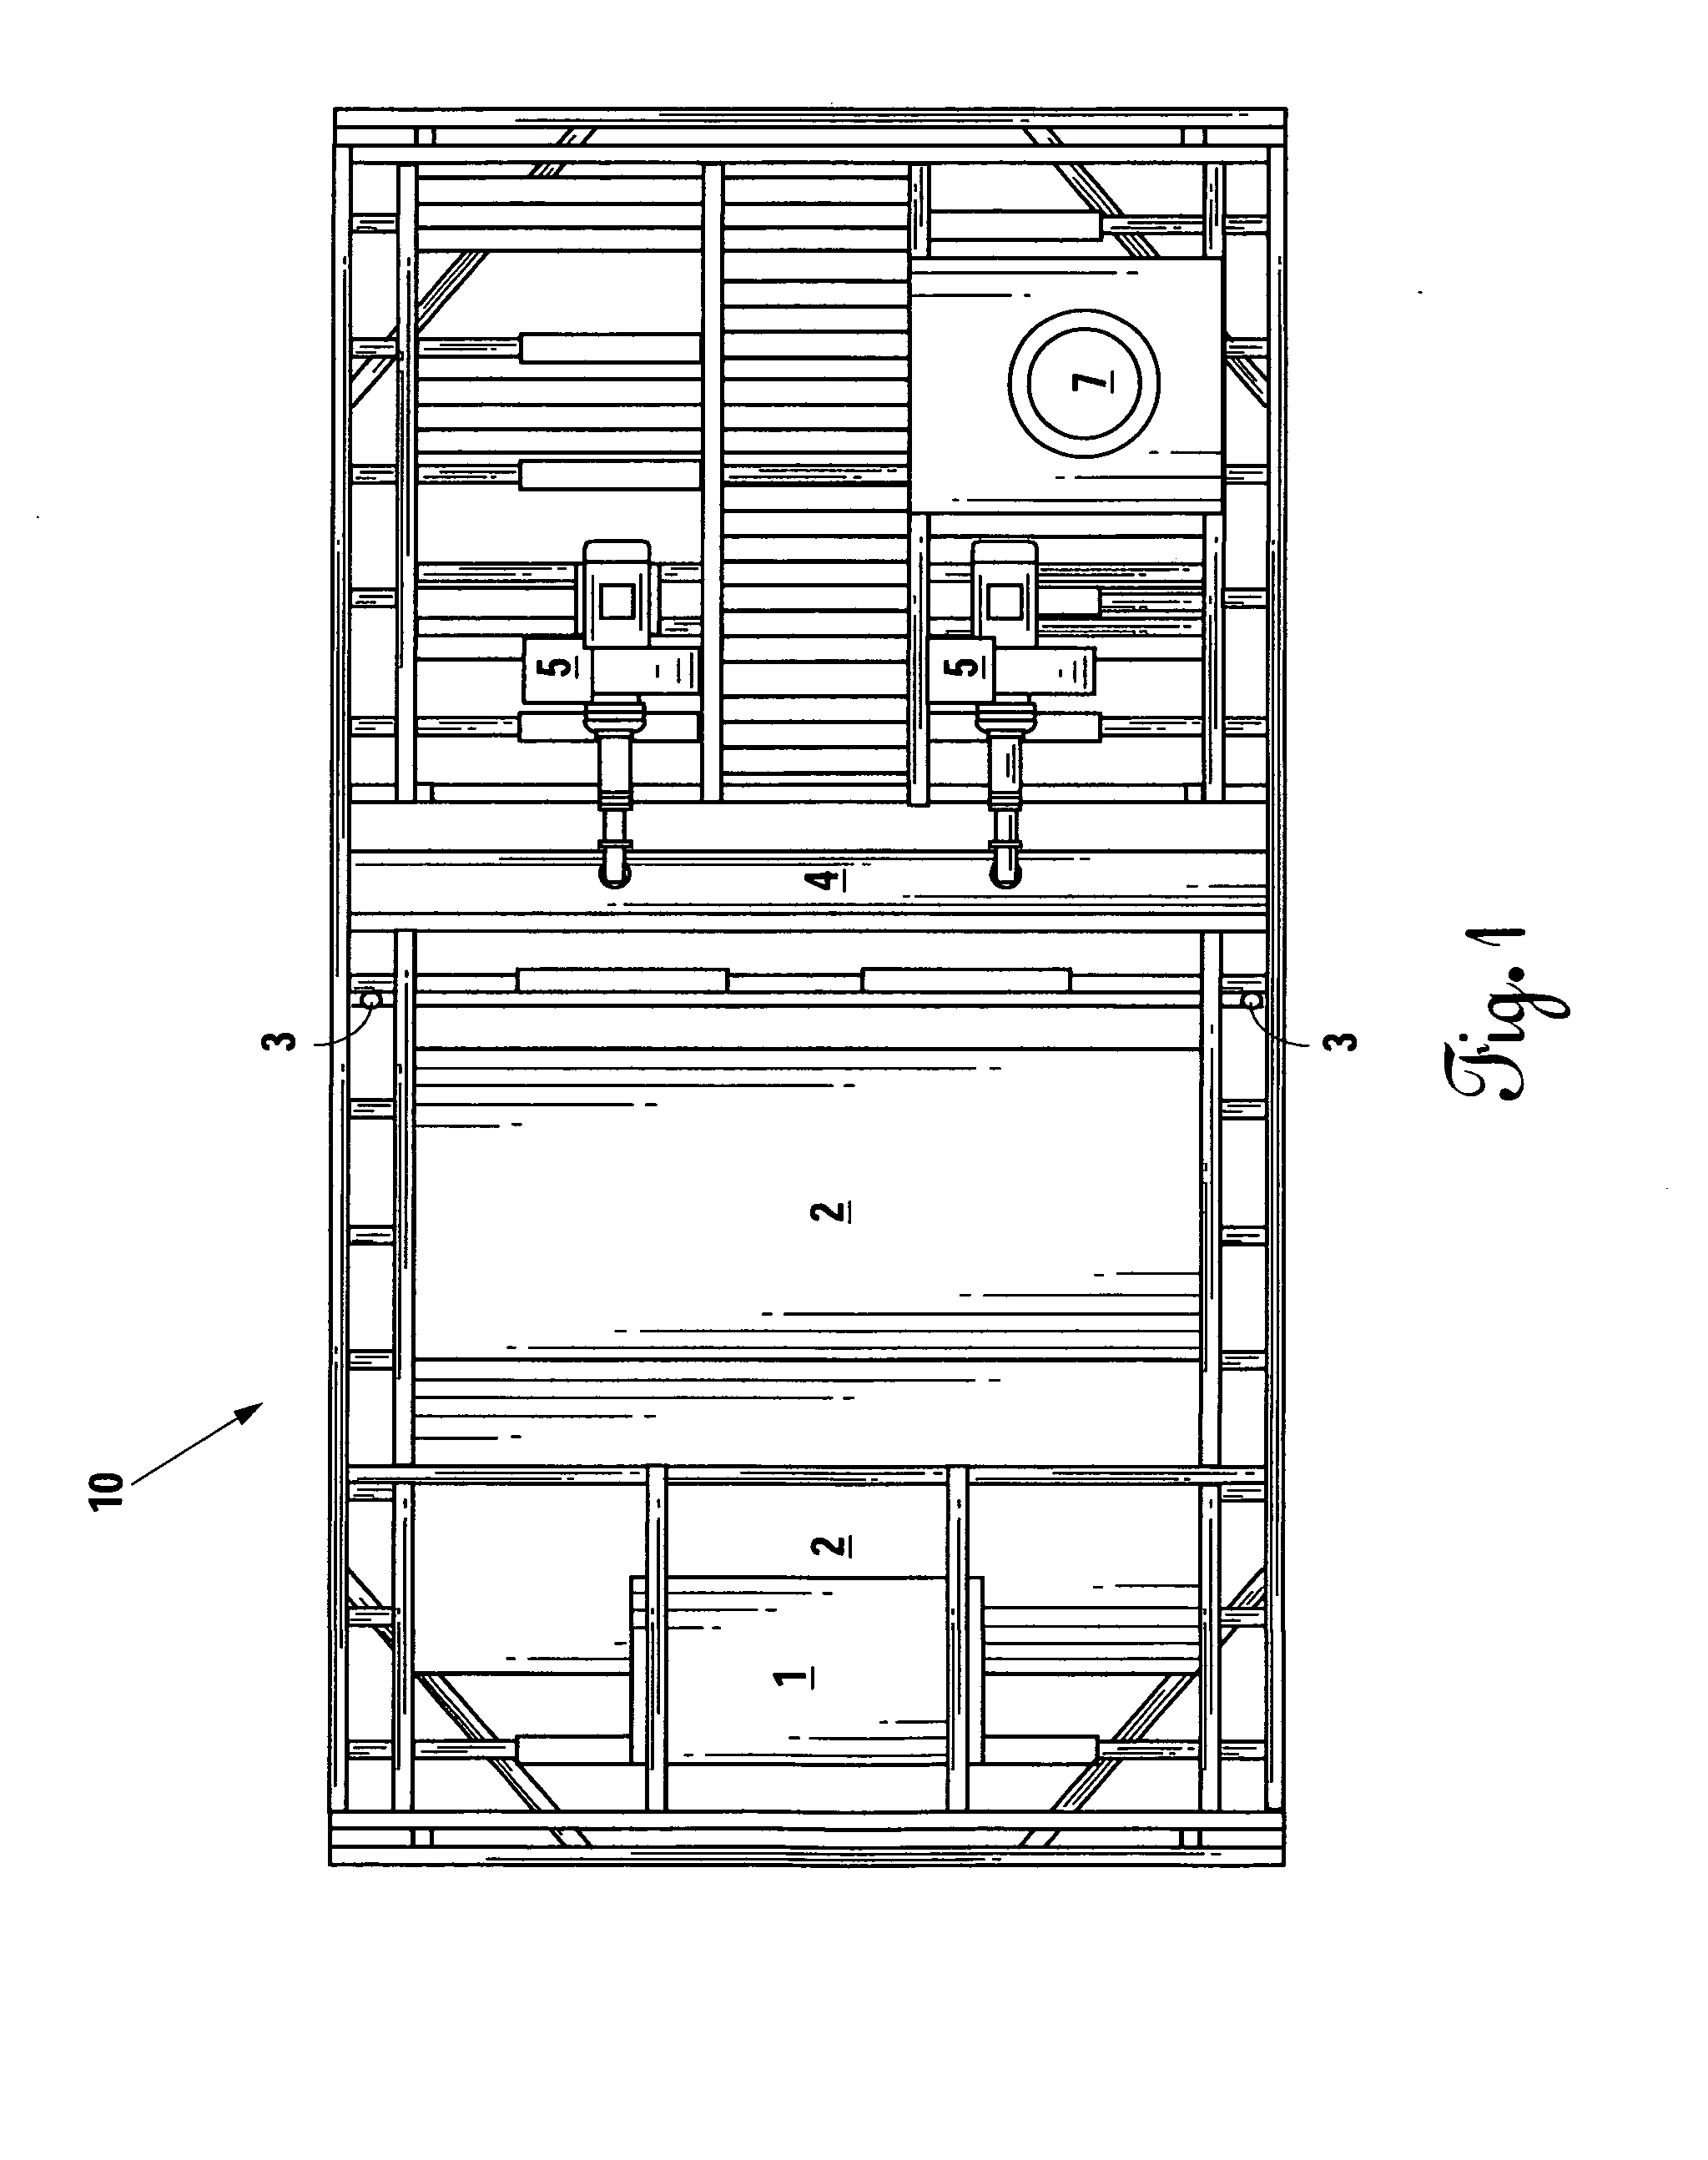 System and method for cleaning and sanitizing mattresses